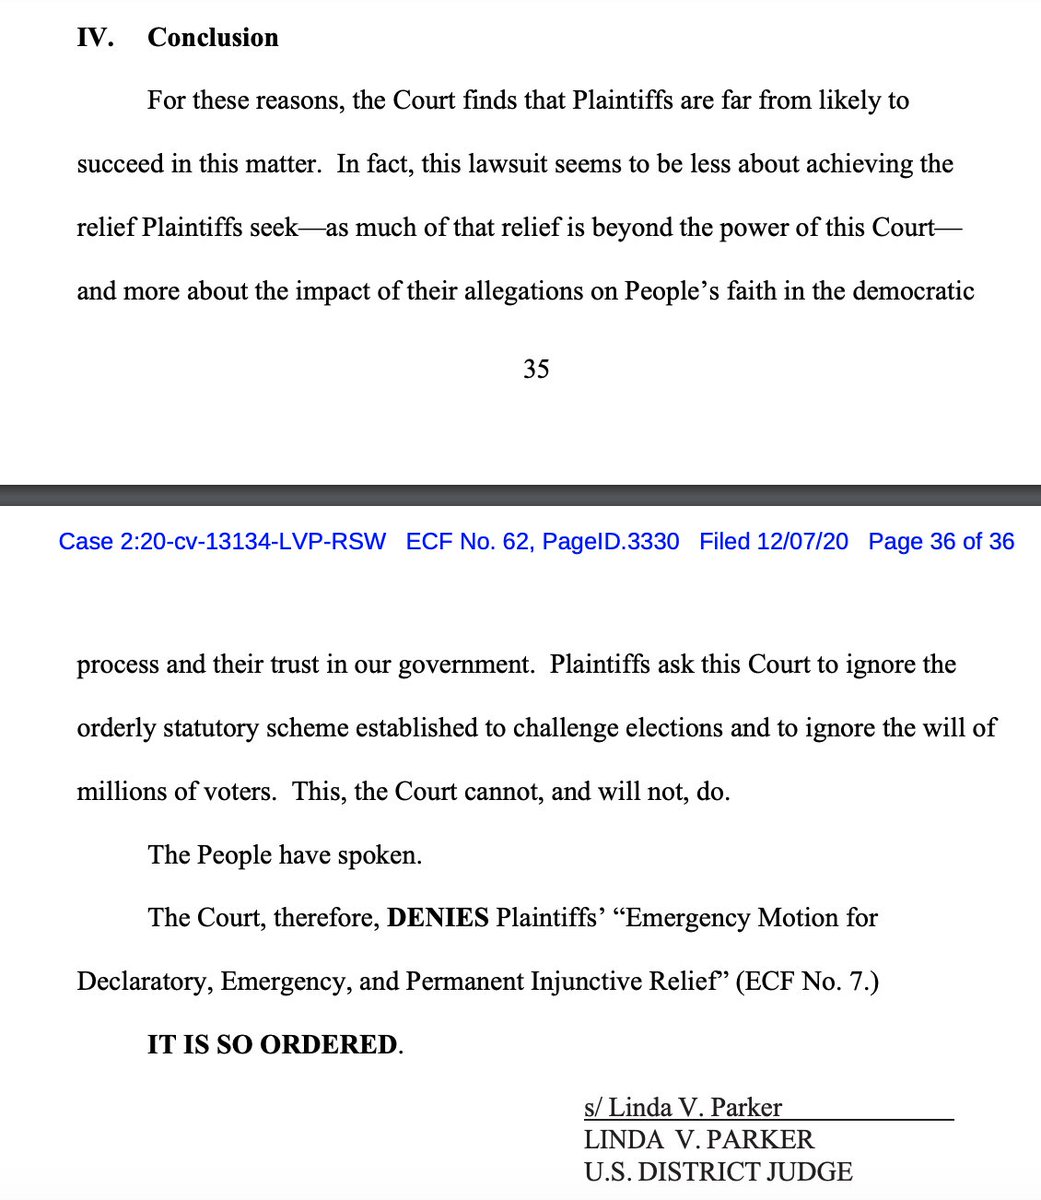 New: Another loss for Sidney Powell, this time in Michigan. The loss is multifaceted:- state officials immune- case is moot- laches (waited too long to sue)- abstention b/c of state court litigation- no standing- unlikely to succeed on the merits https://assets.documentcloud.org/documents/7334898/12-7-20-King-v-Whitmer-Opinion.pdf